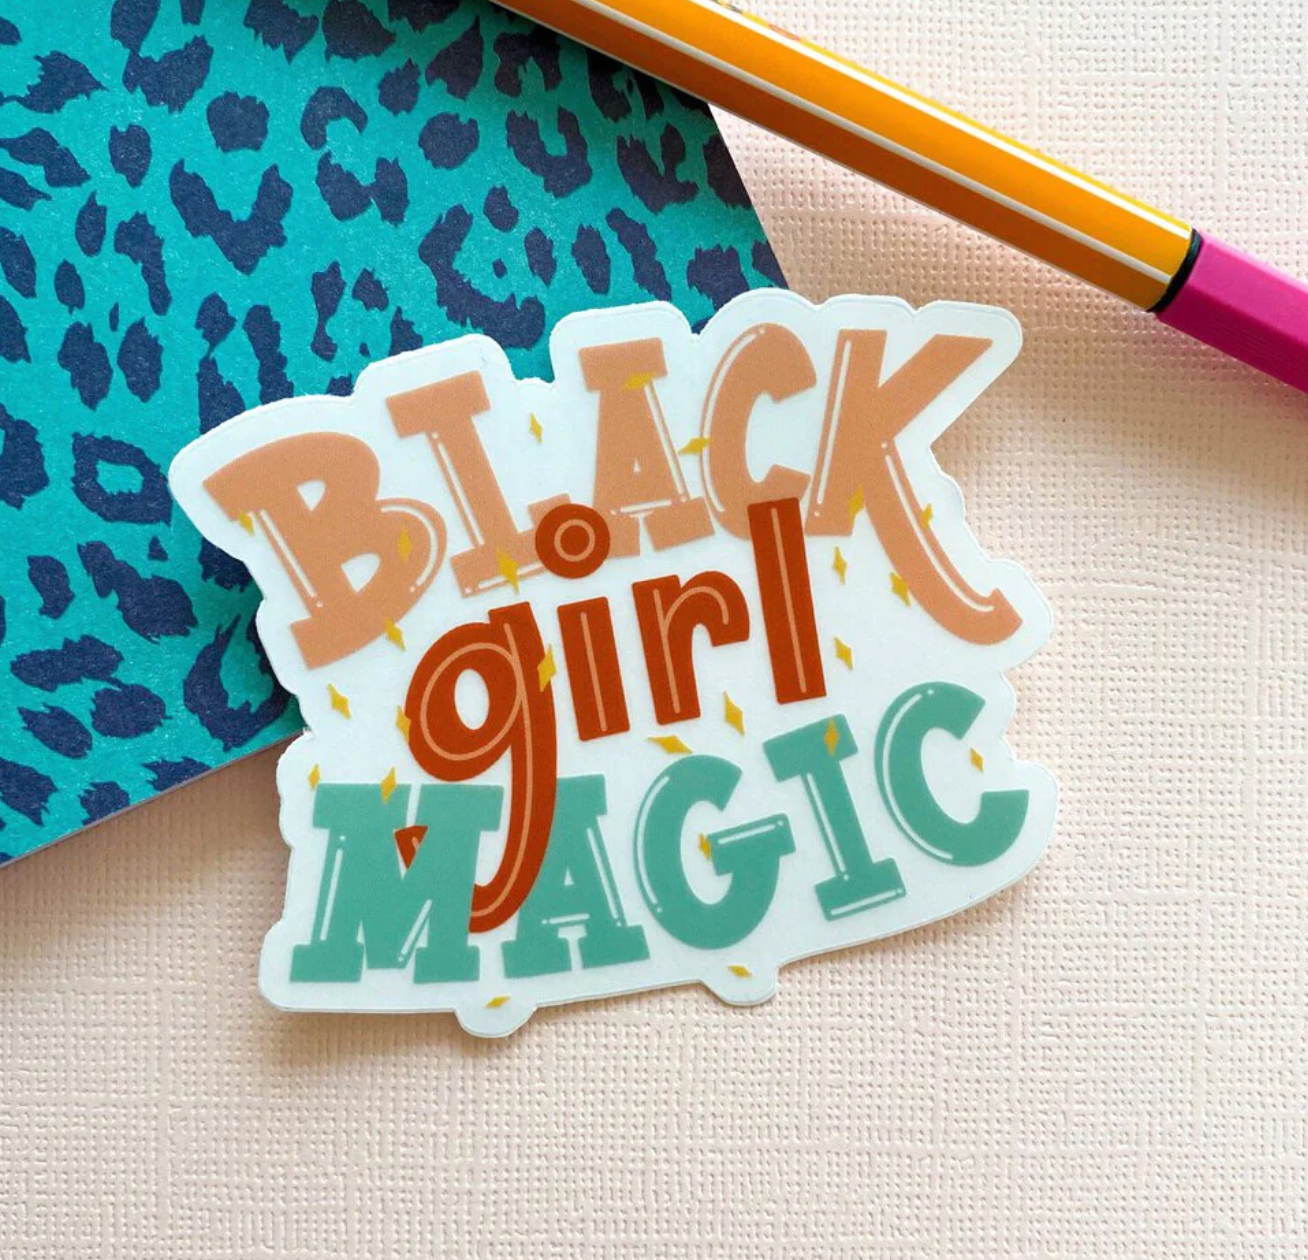 Colorful "Black Girl Magic" sticker made by Creative Pounds